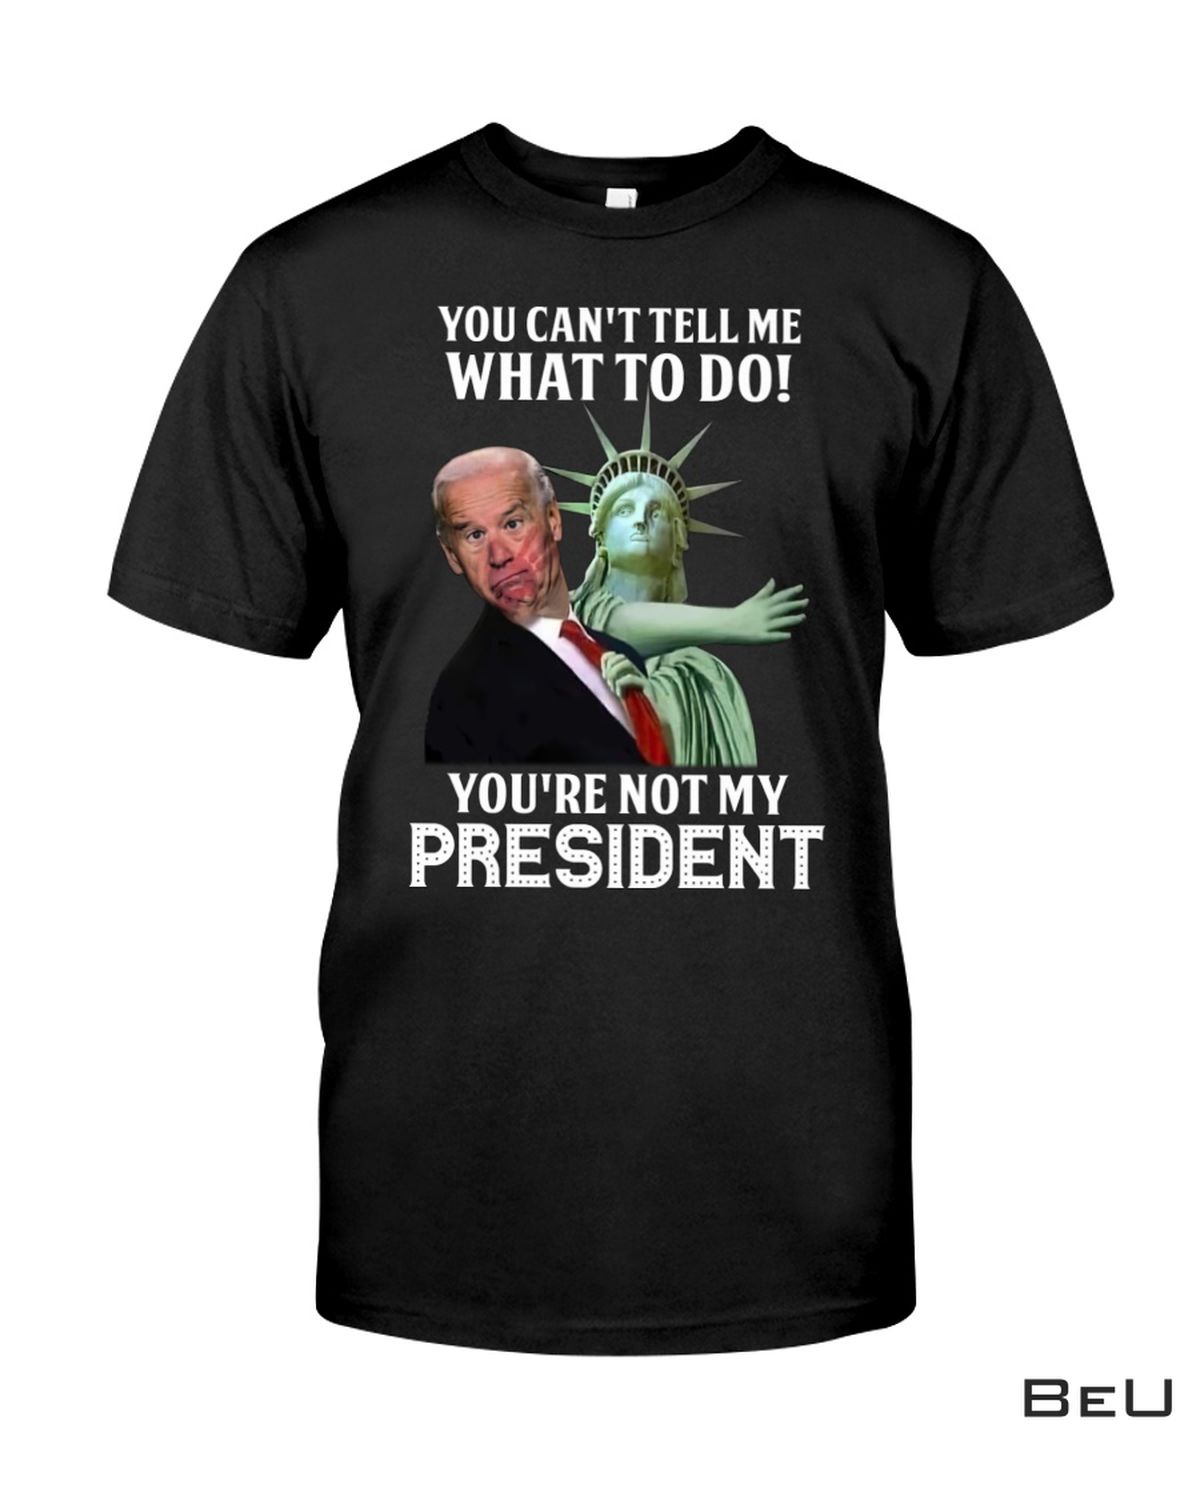 Liberty Statue Slap Biden You Can't Tell Me What To Do Shirt